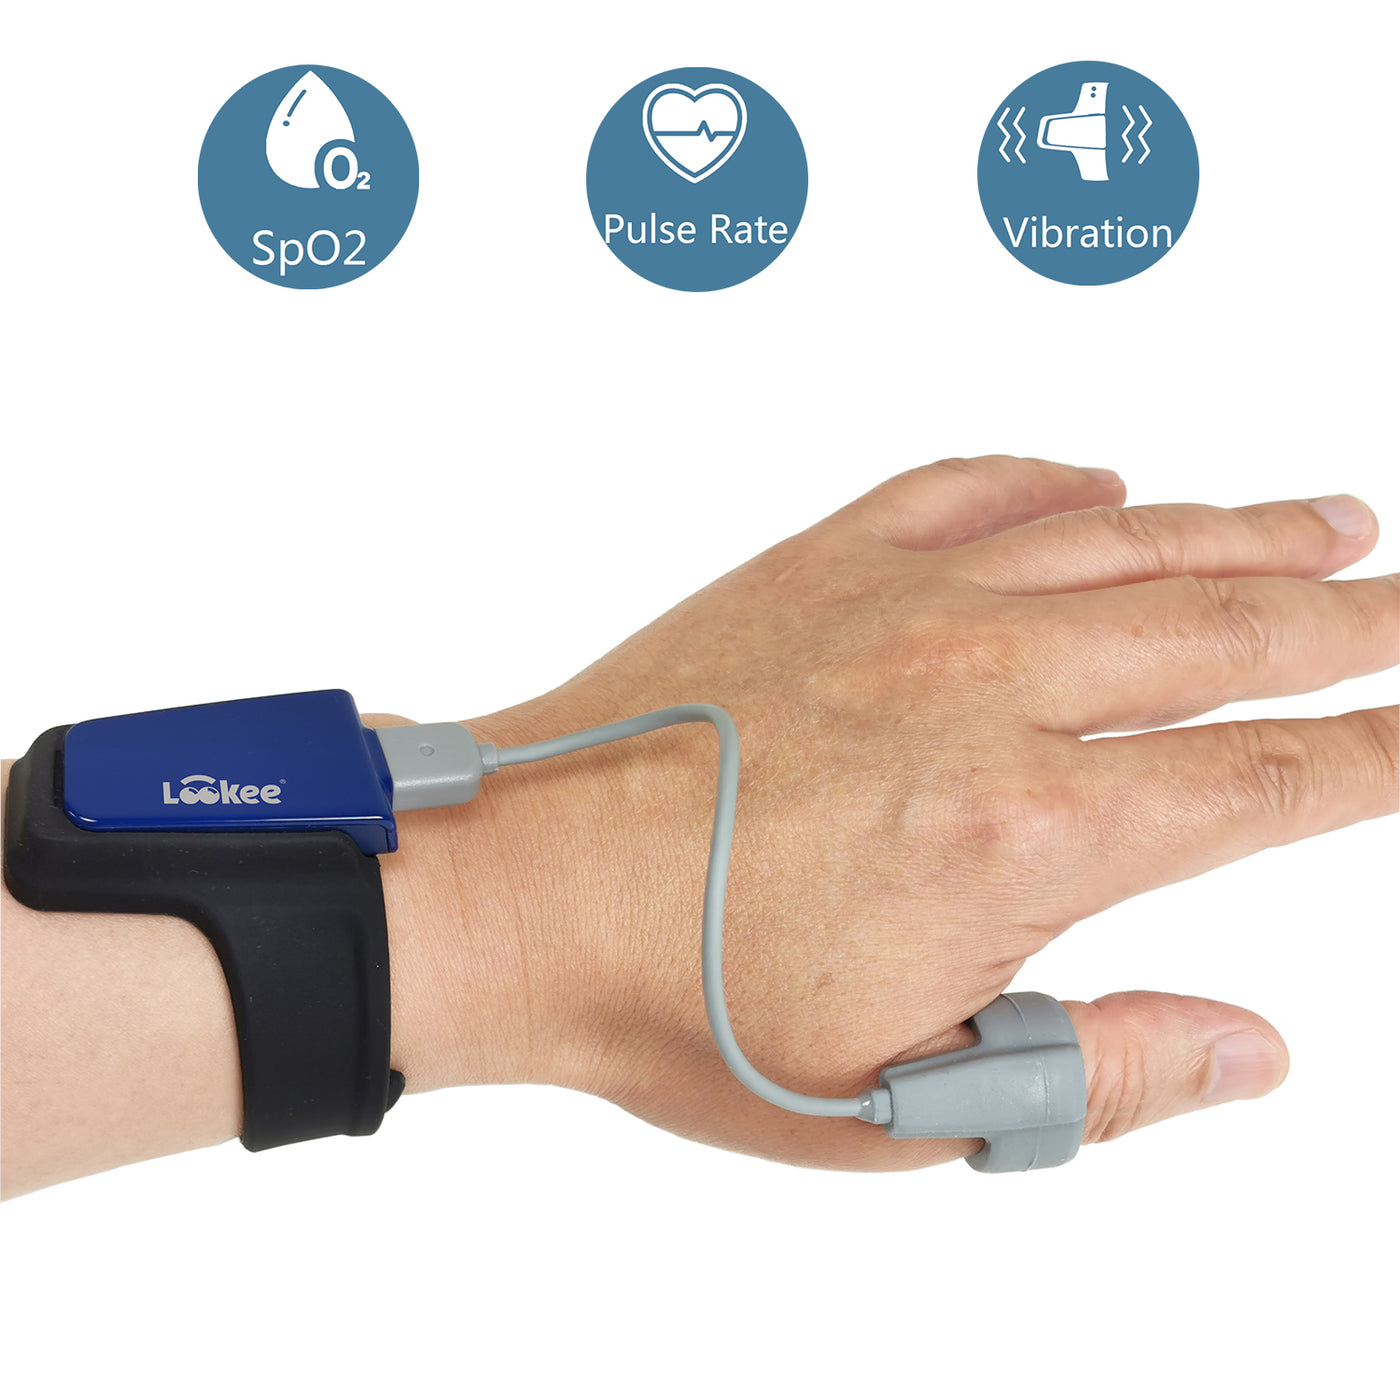 Used, LOOKEE® Wrist Sleep Oxygen Monitor with Vibration Alarm for Apnea & Low O2 | Overnight Pulse Oximeter Tracks Blood Oxygen Level and Heart Rate